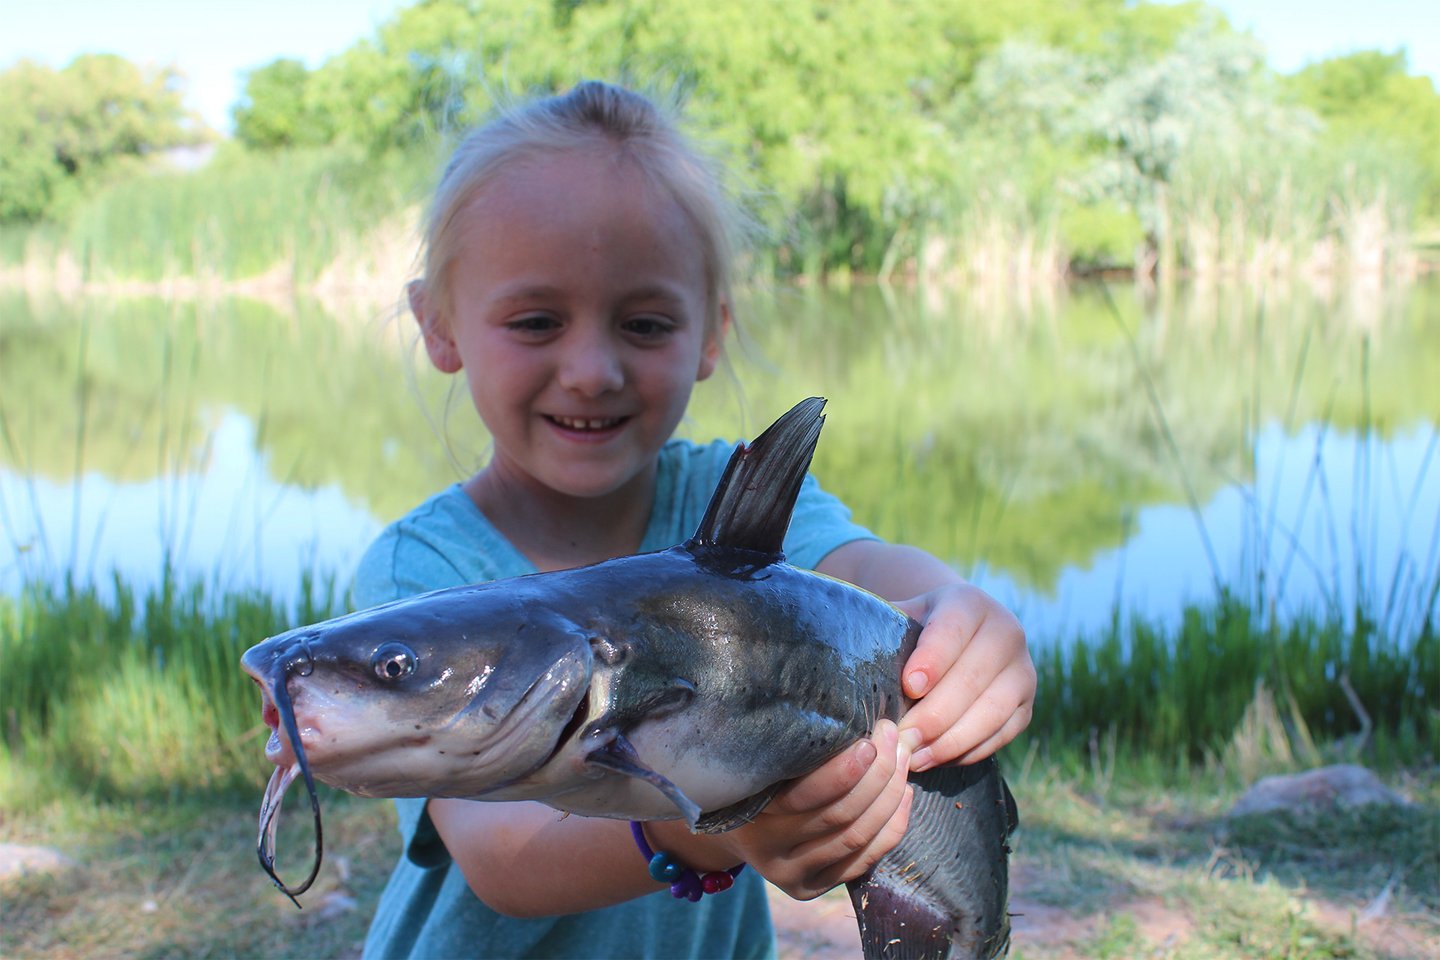 Fishing in your state parks is fun for all ages!